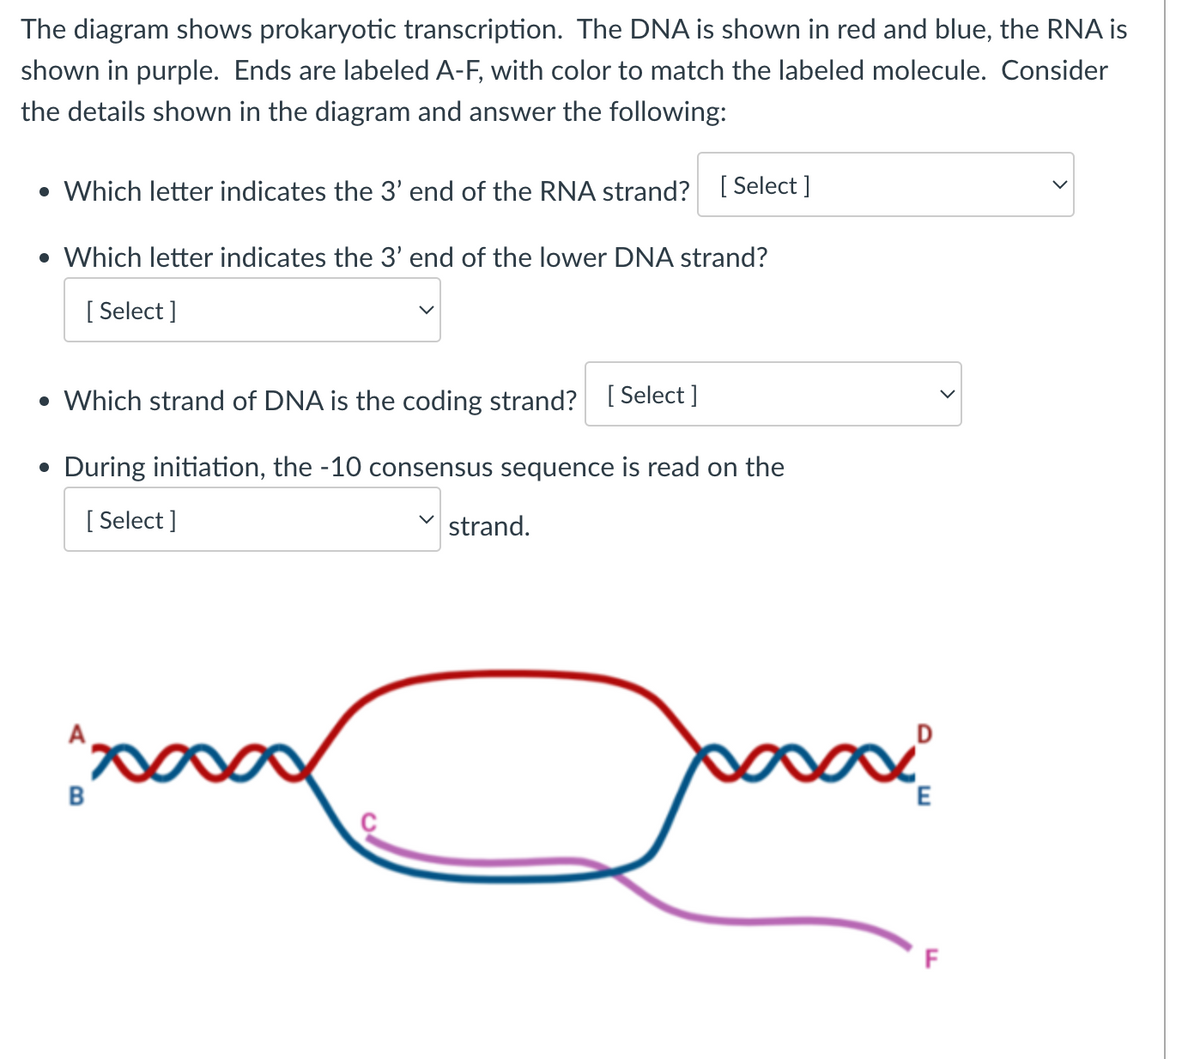 The diagram shows prokaryotic transcription. The DNA is shown in red and blue, the RNA is
shown in purple. Ends are labeled A-F, with color to match the labeled molecule. Consider
the details shown in the diagram and answer the following:
• Which letter indicates the 3' end of the RNA strand? [Select]
• Which letter indicates the 3' end of the lower DNA strand?
[Select]
• Which strand of DNA is the coding strand? [Select]
During initiation, the -10 consensus sequence is read on the
[Select]
strand.
B
E
F